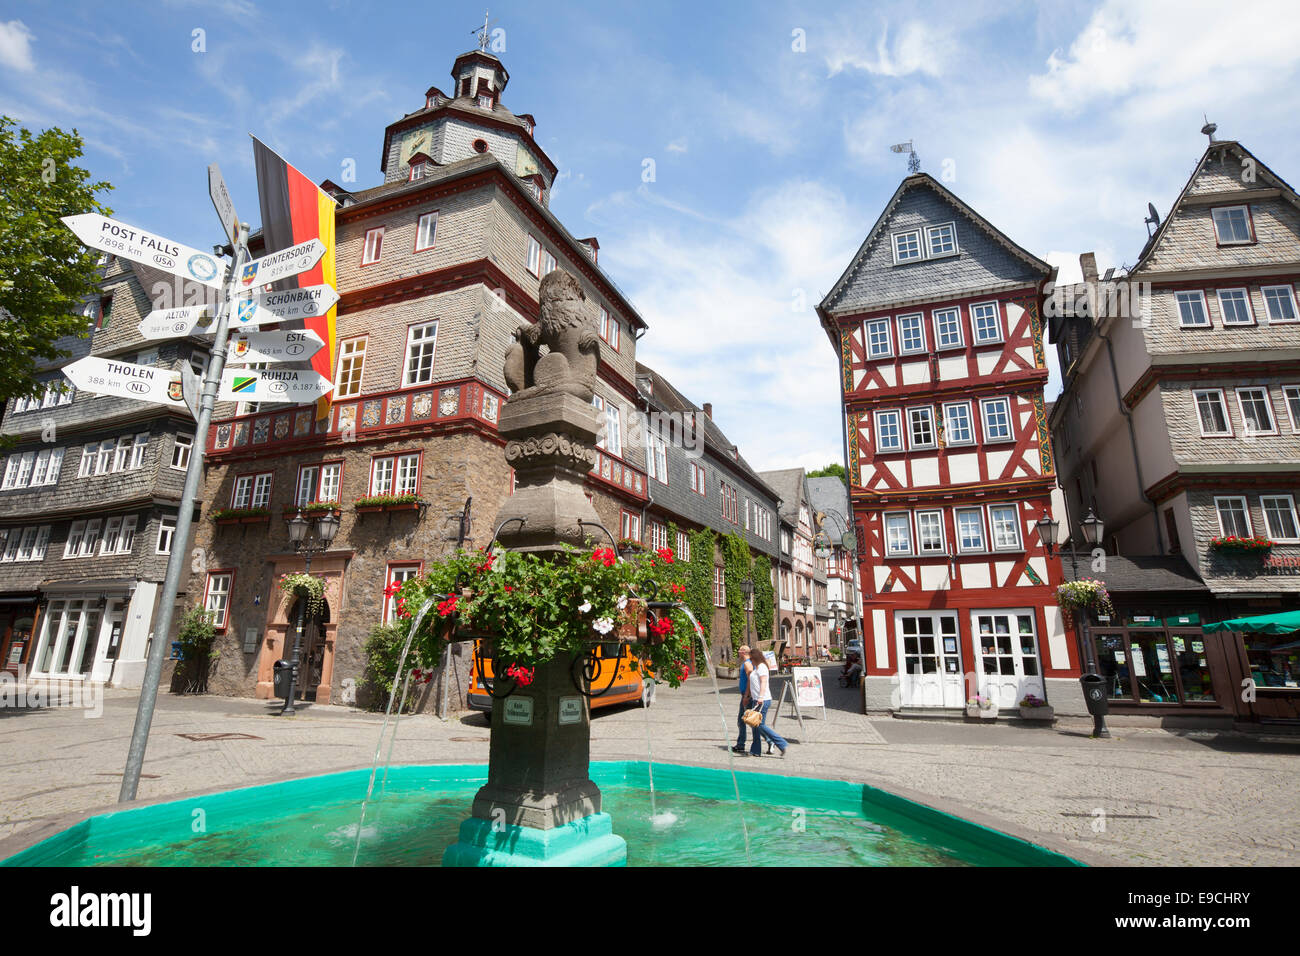 City hall, Buttermarkt butter market, historic old town of Herborn, Hesse, Germany, Europe, Stock Photo